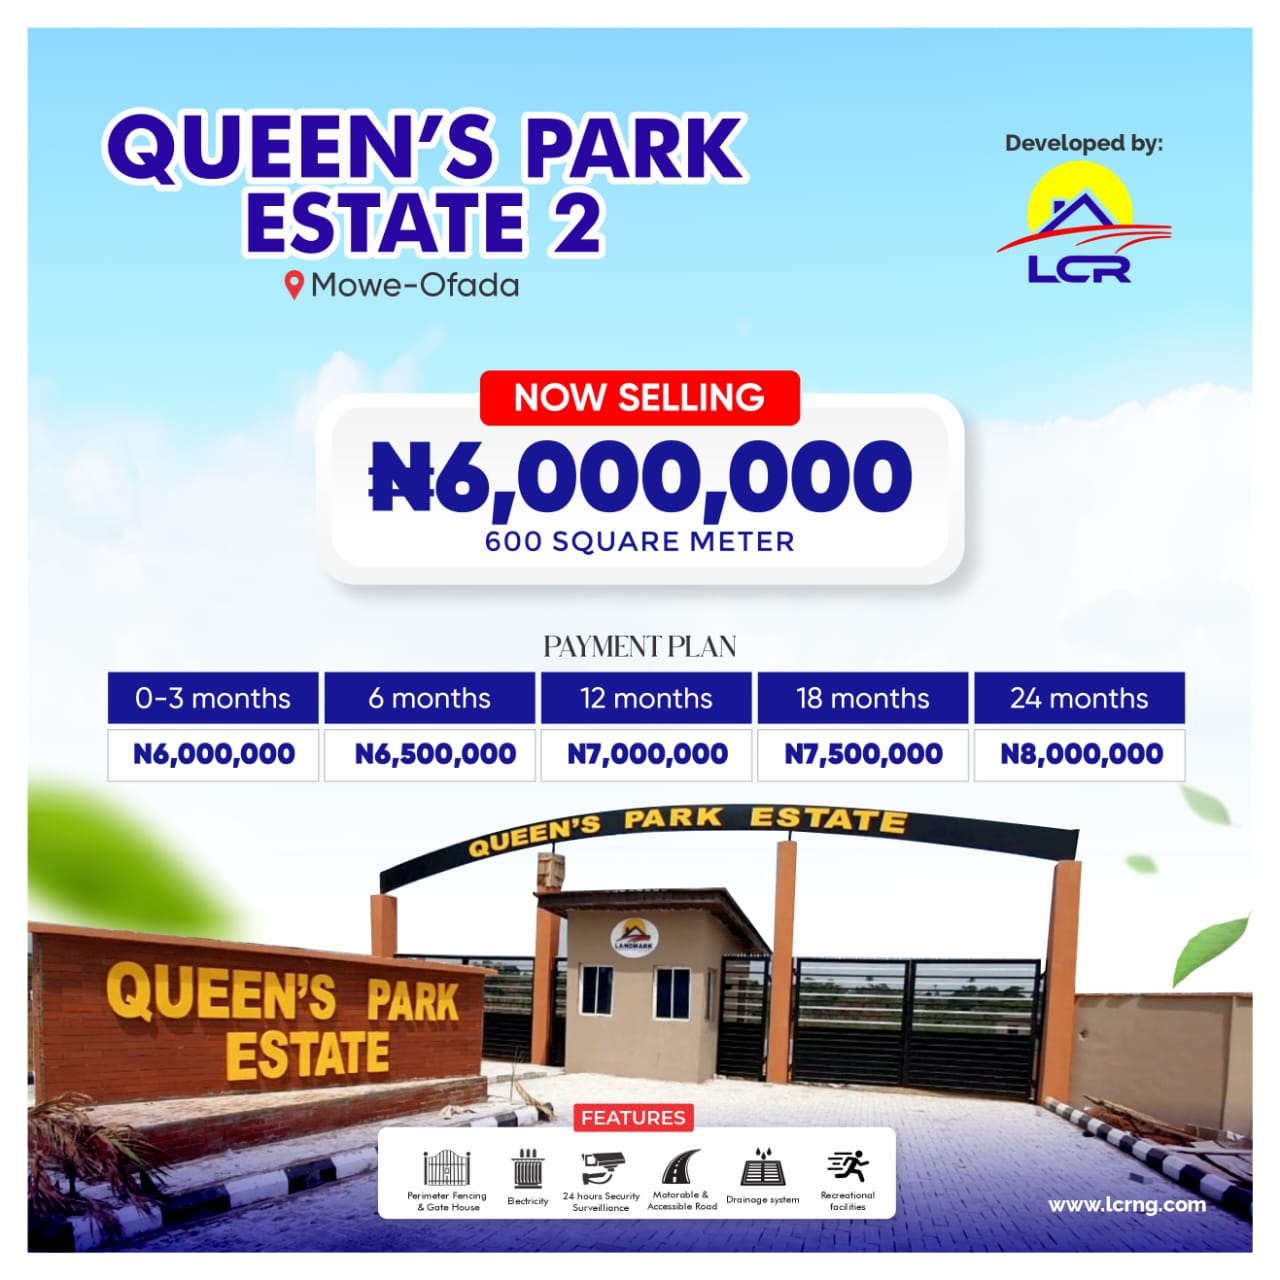 Queen's Park Estate location iş Mowe/Ofada by Sagamu Interchange which iş a perfect investment area with High Return on Investment (ROI)